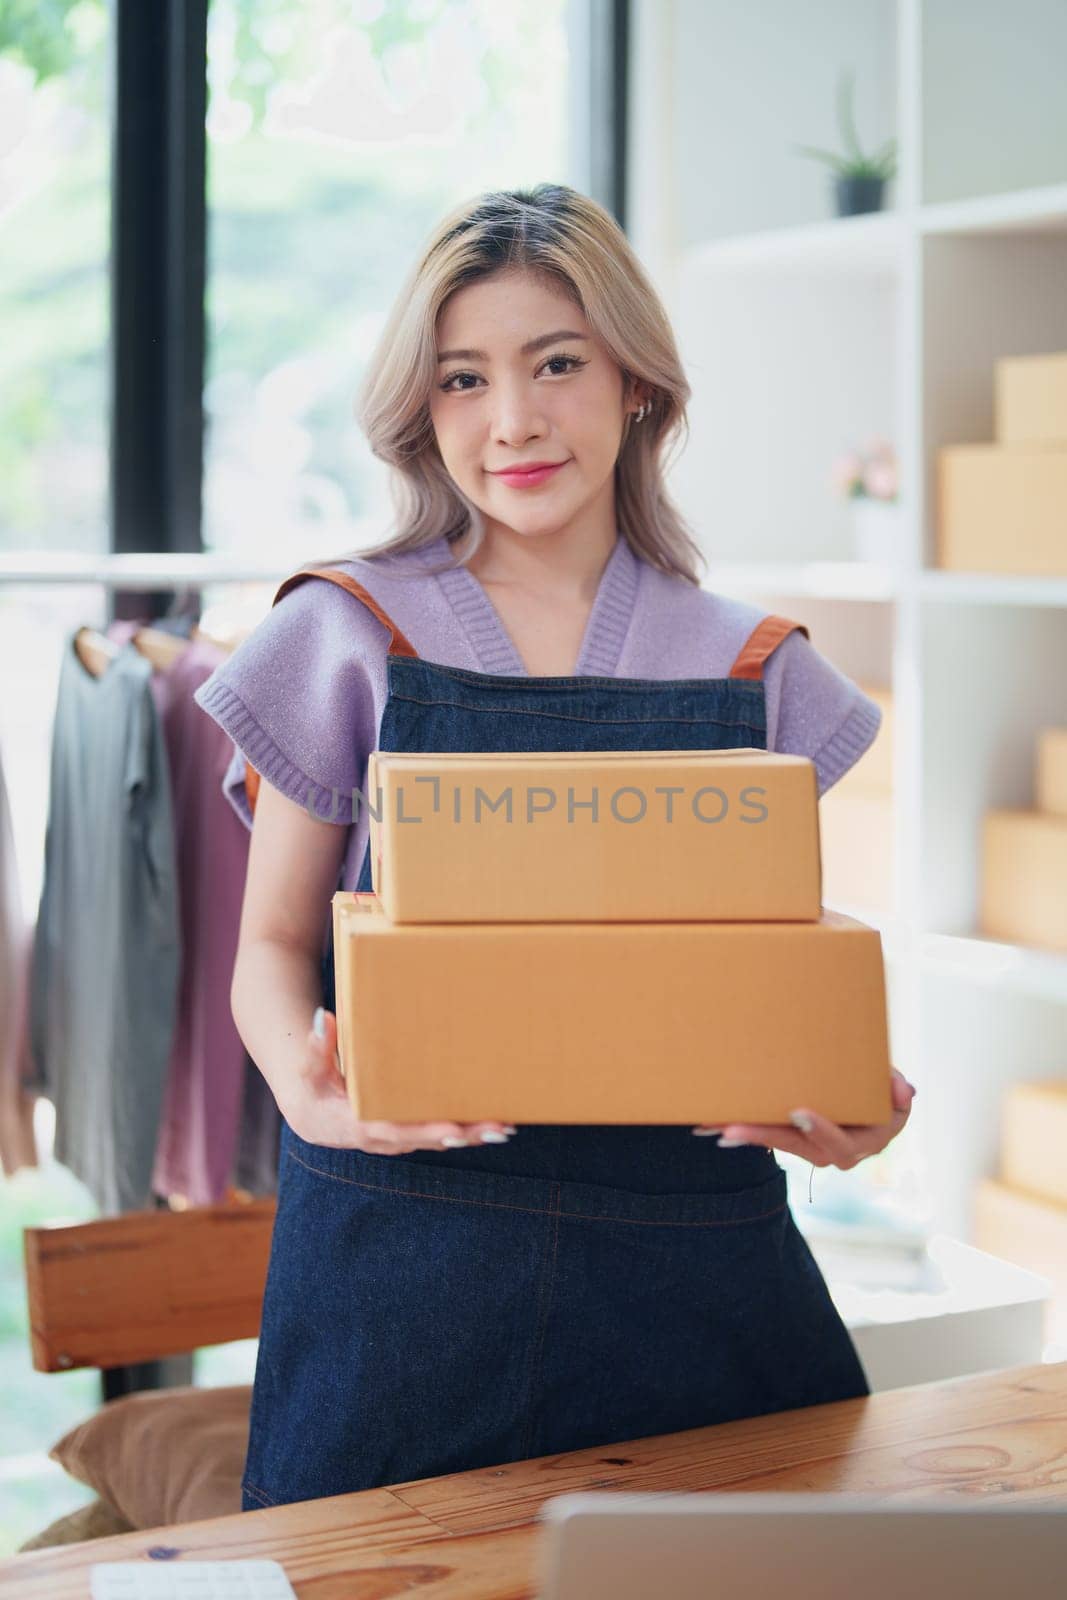 Online delivery, female small business owners are ecstatic when they see unexpected sales and customer orders in their business planning and marketing by Manastrong